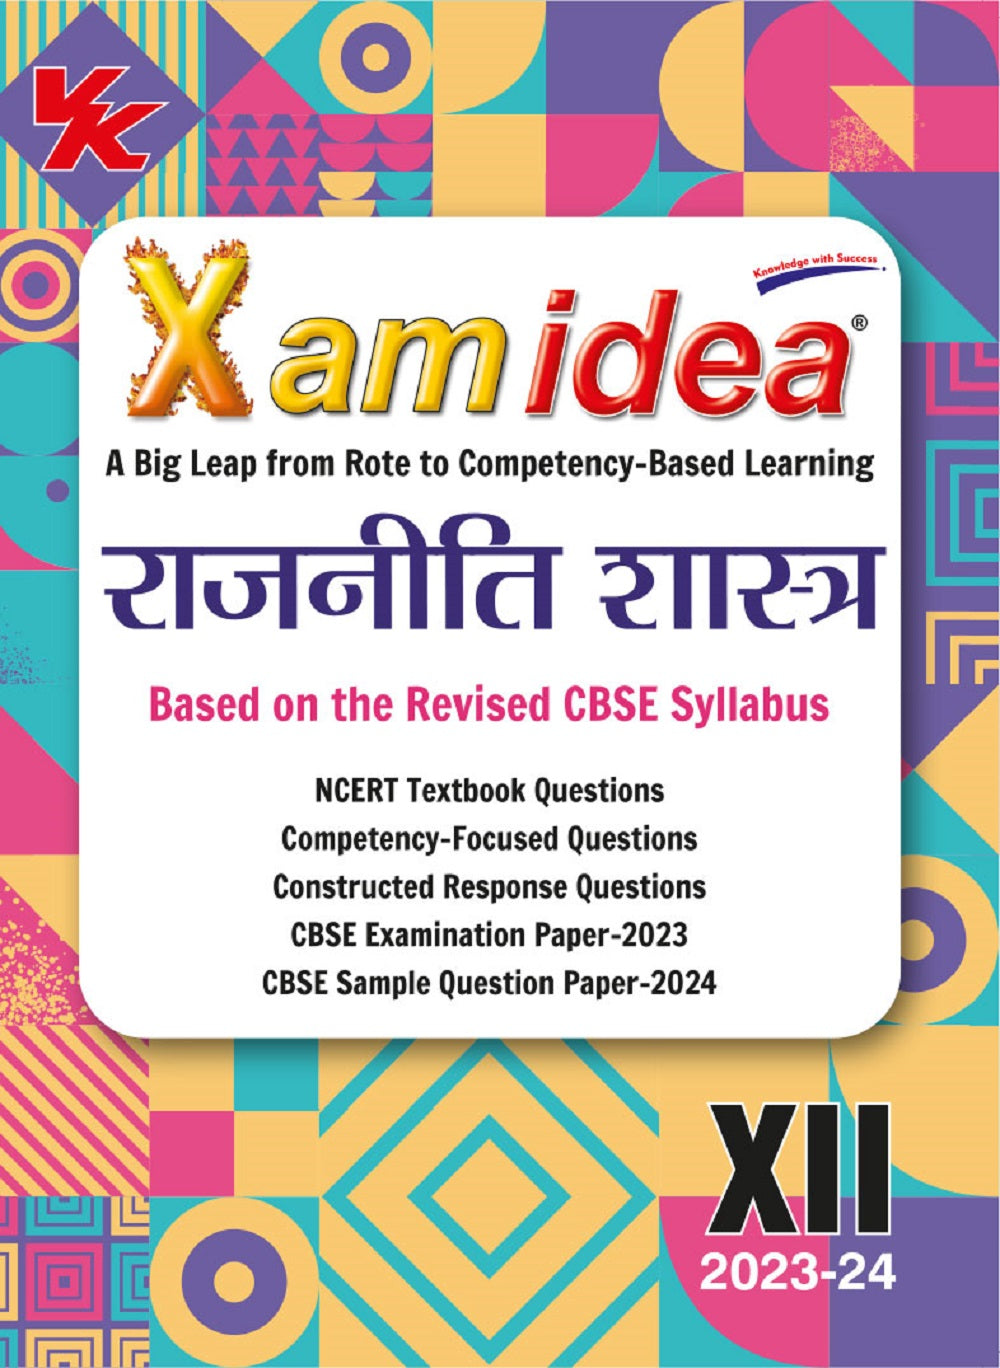 Xam idea Political Science (Hindi)Class 12 Book | CBSE Board | Chapterwise Question Bank | Based on Revised CBSE Syllabus | NCERT Questions Included | 2023-24 Exam